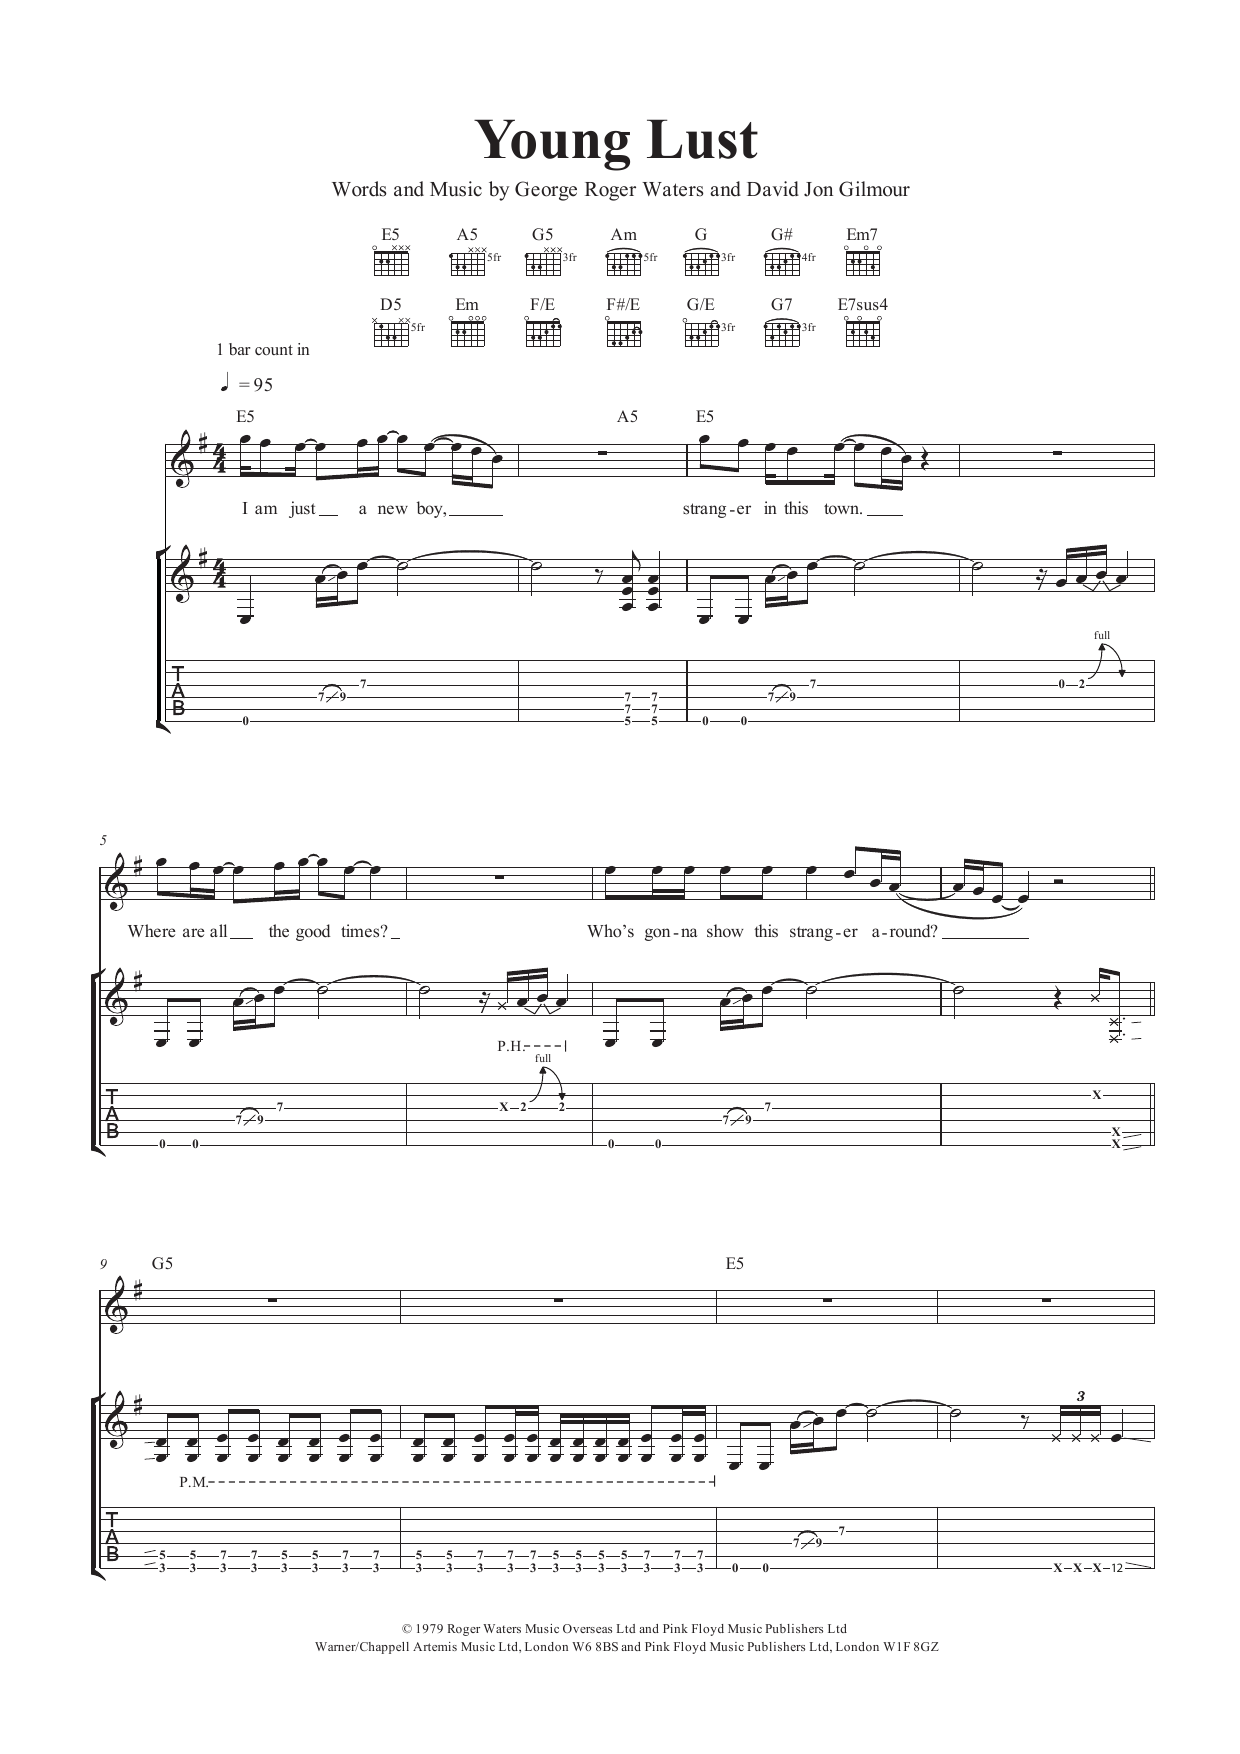 Download Pink Floyd Young Lust Sheet Music